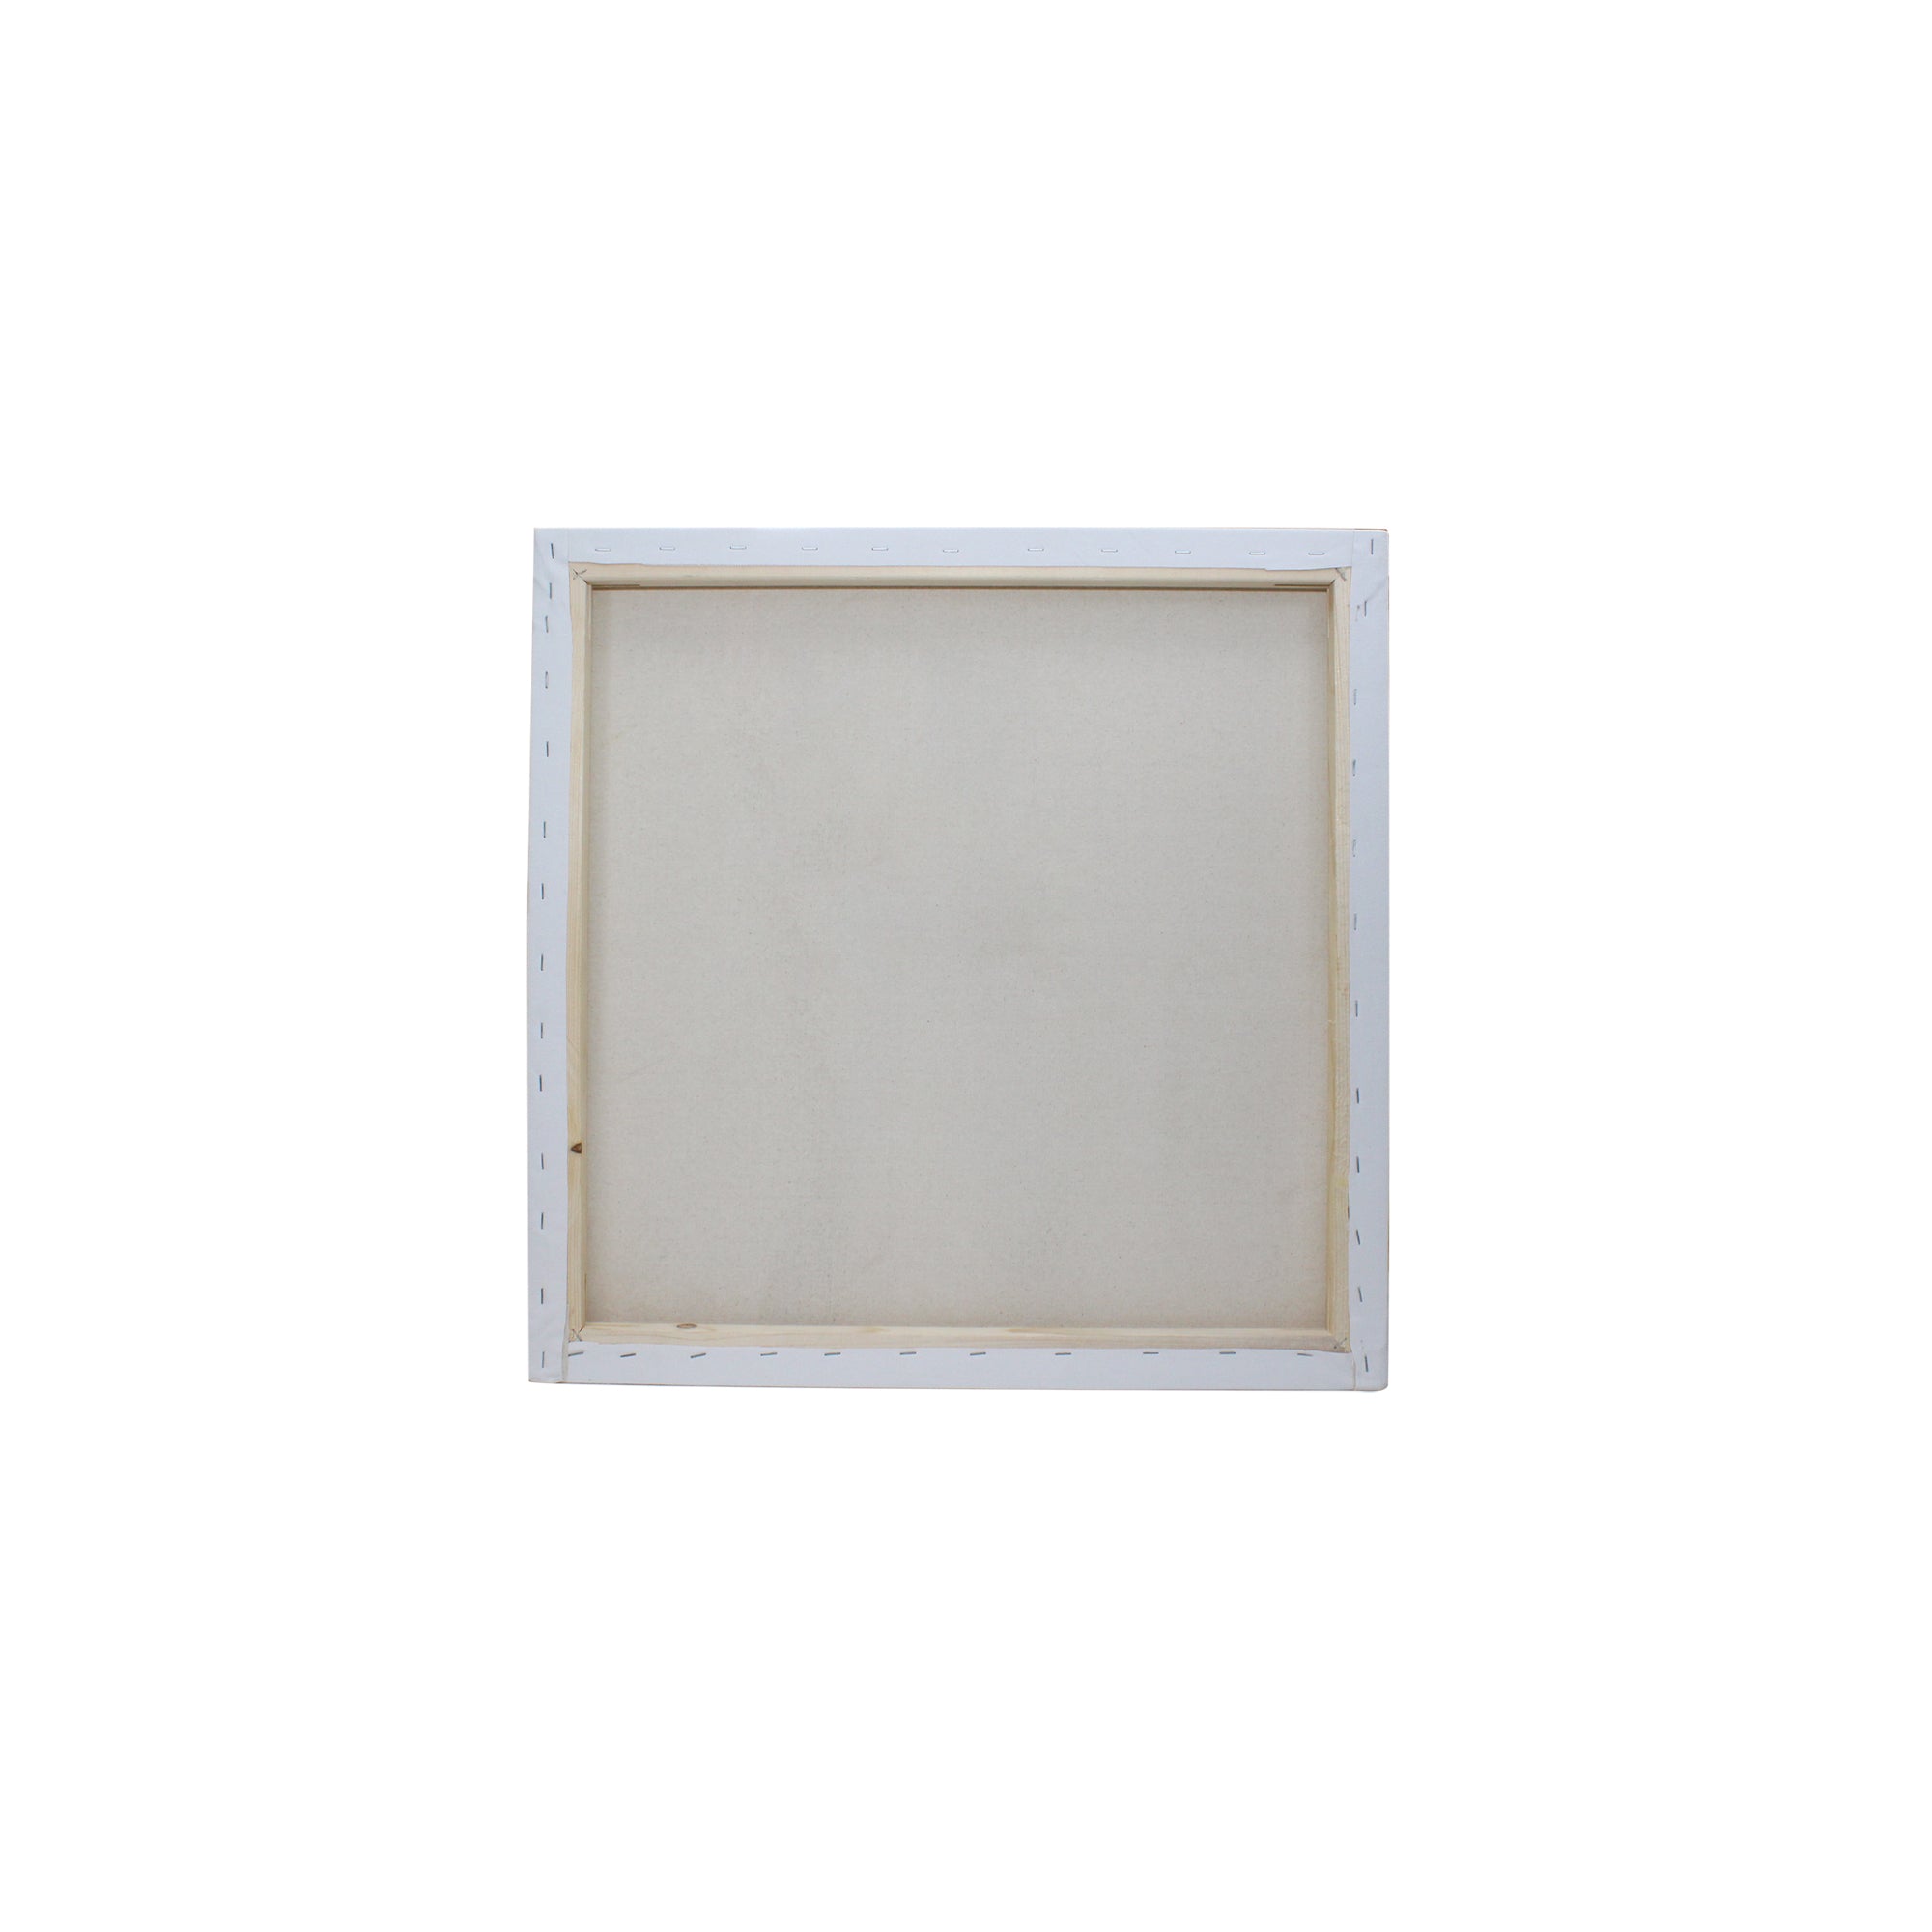 Stretched Canvas Deep Edge Frame 34X37Mm 305Gsm 6 X 6Inch 1Pc